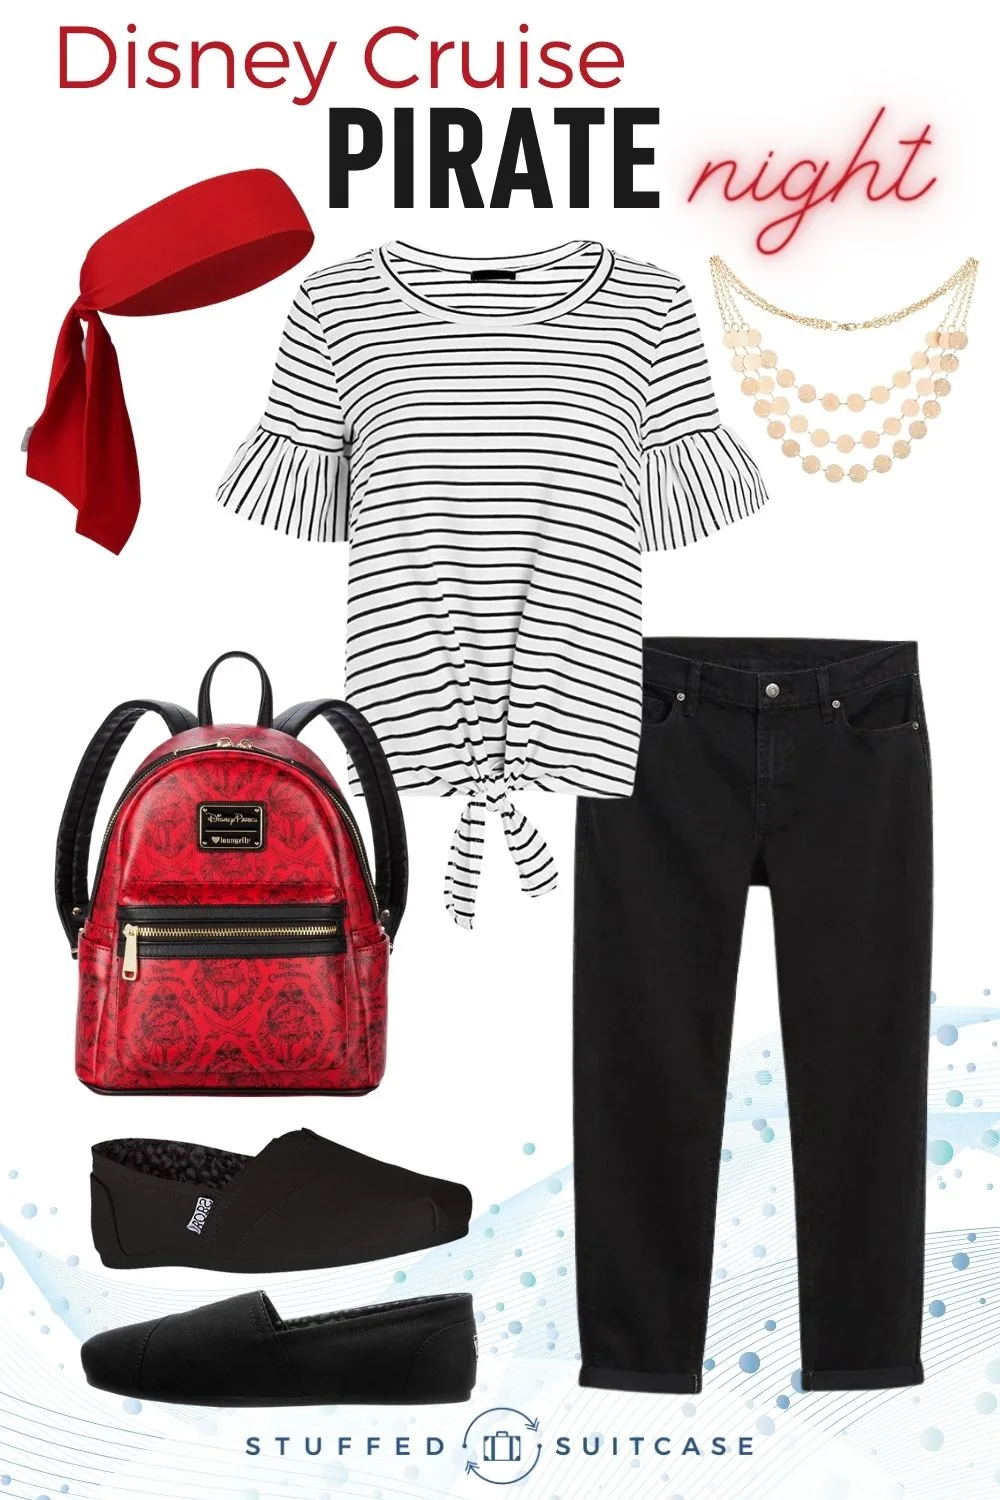 Disney cruise pirate night outfit for women with striped top black jeans redd pirate backpack